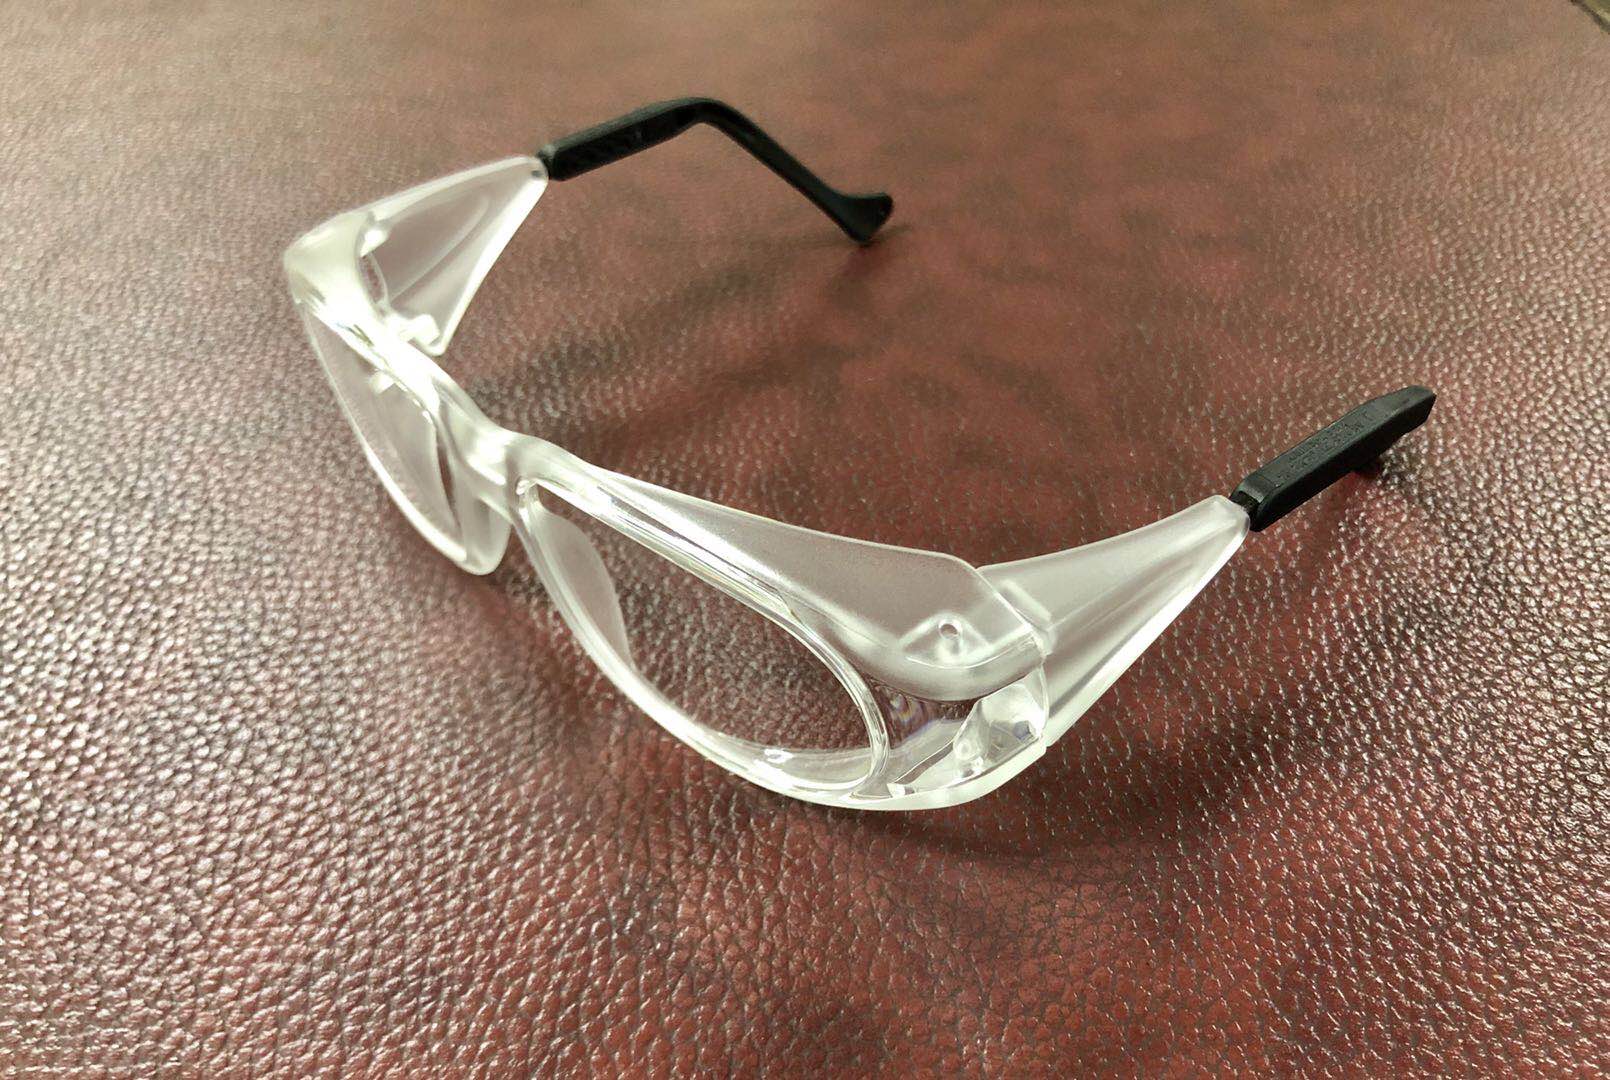 2020 protective goggles in stock